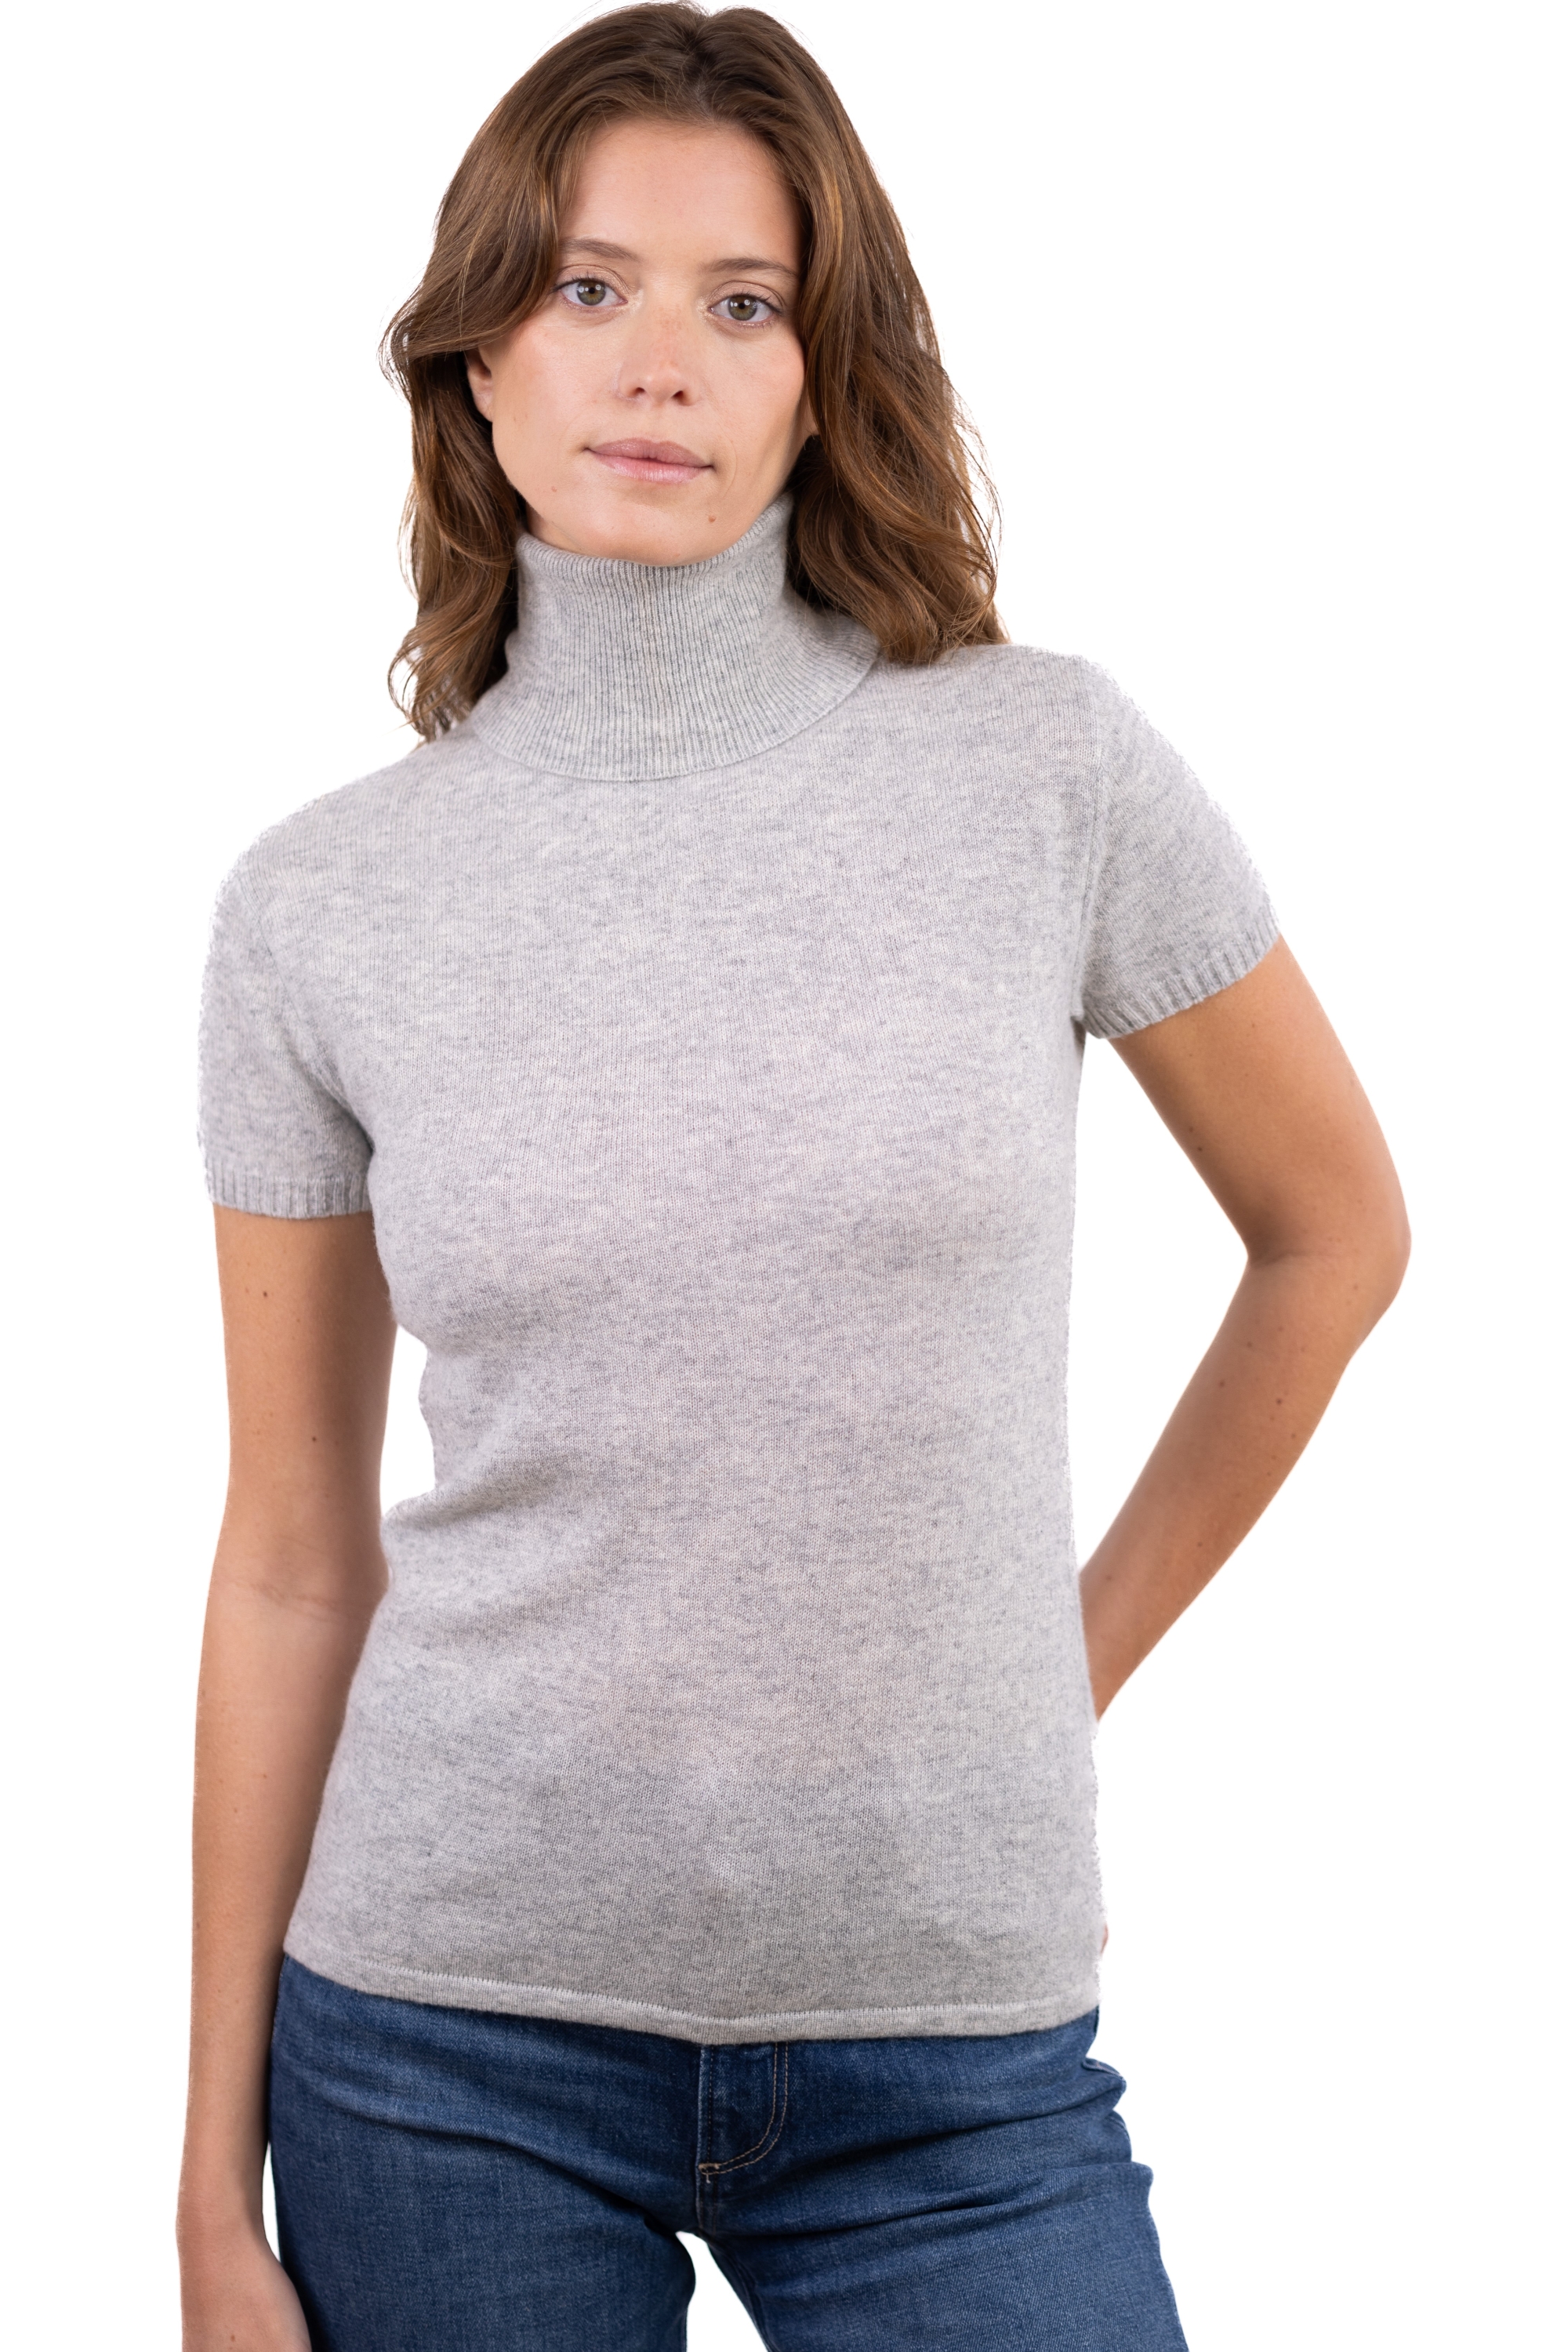 Cashmere ladies timeless classics olivia flanelle chine m